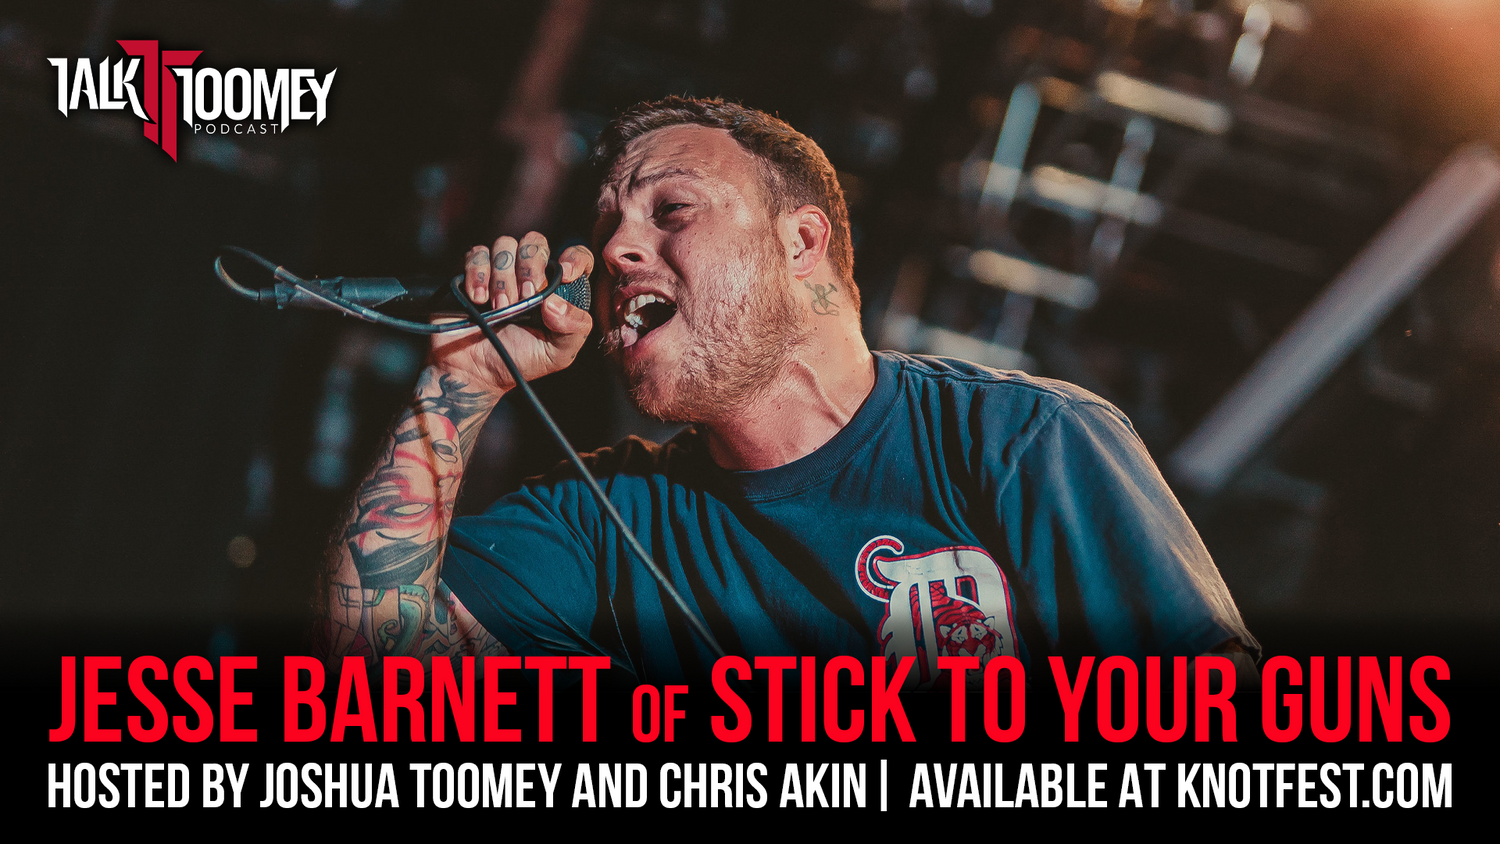 Jesse Barnett of Stick to Your Guns on the upcoming record Spectre, on the latest episode of Talk Toomey